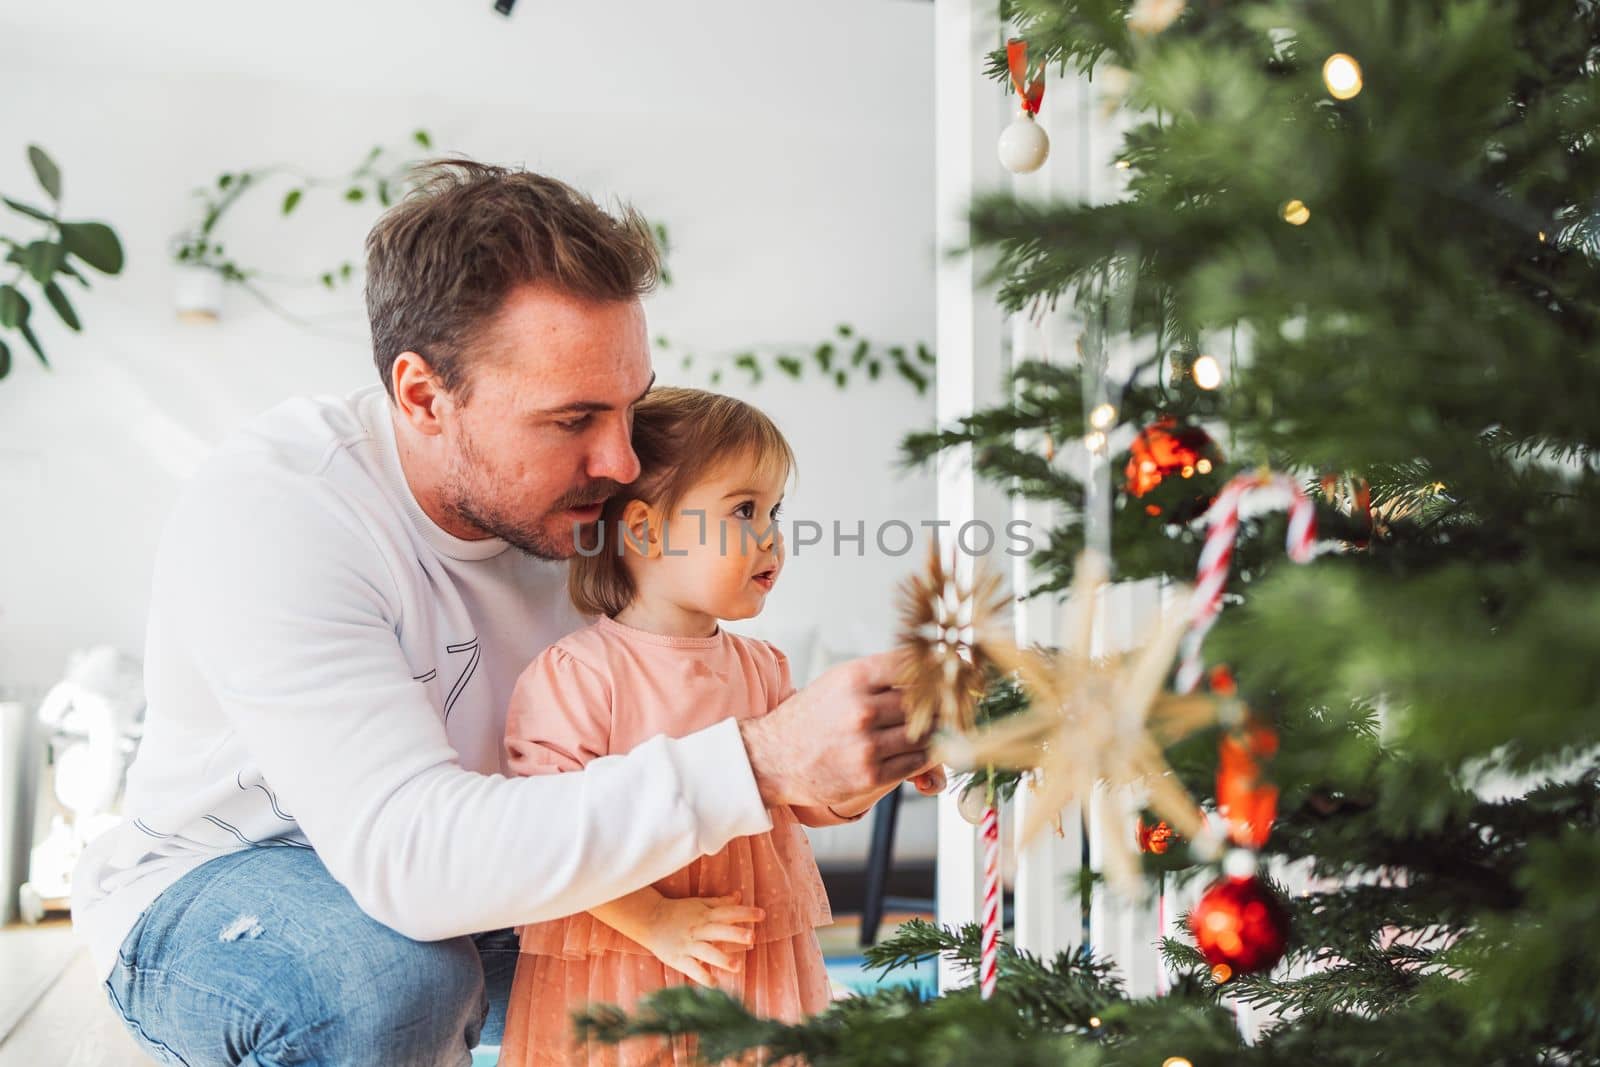 Portrait of young caucasian man with his daughter, decorating the Christmas tree. Loving dad having fun with his little girl on Christmas.